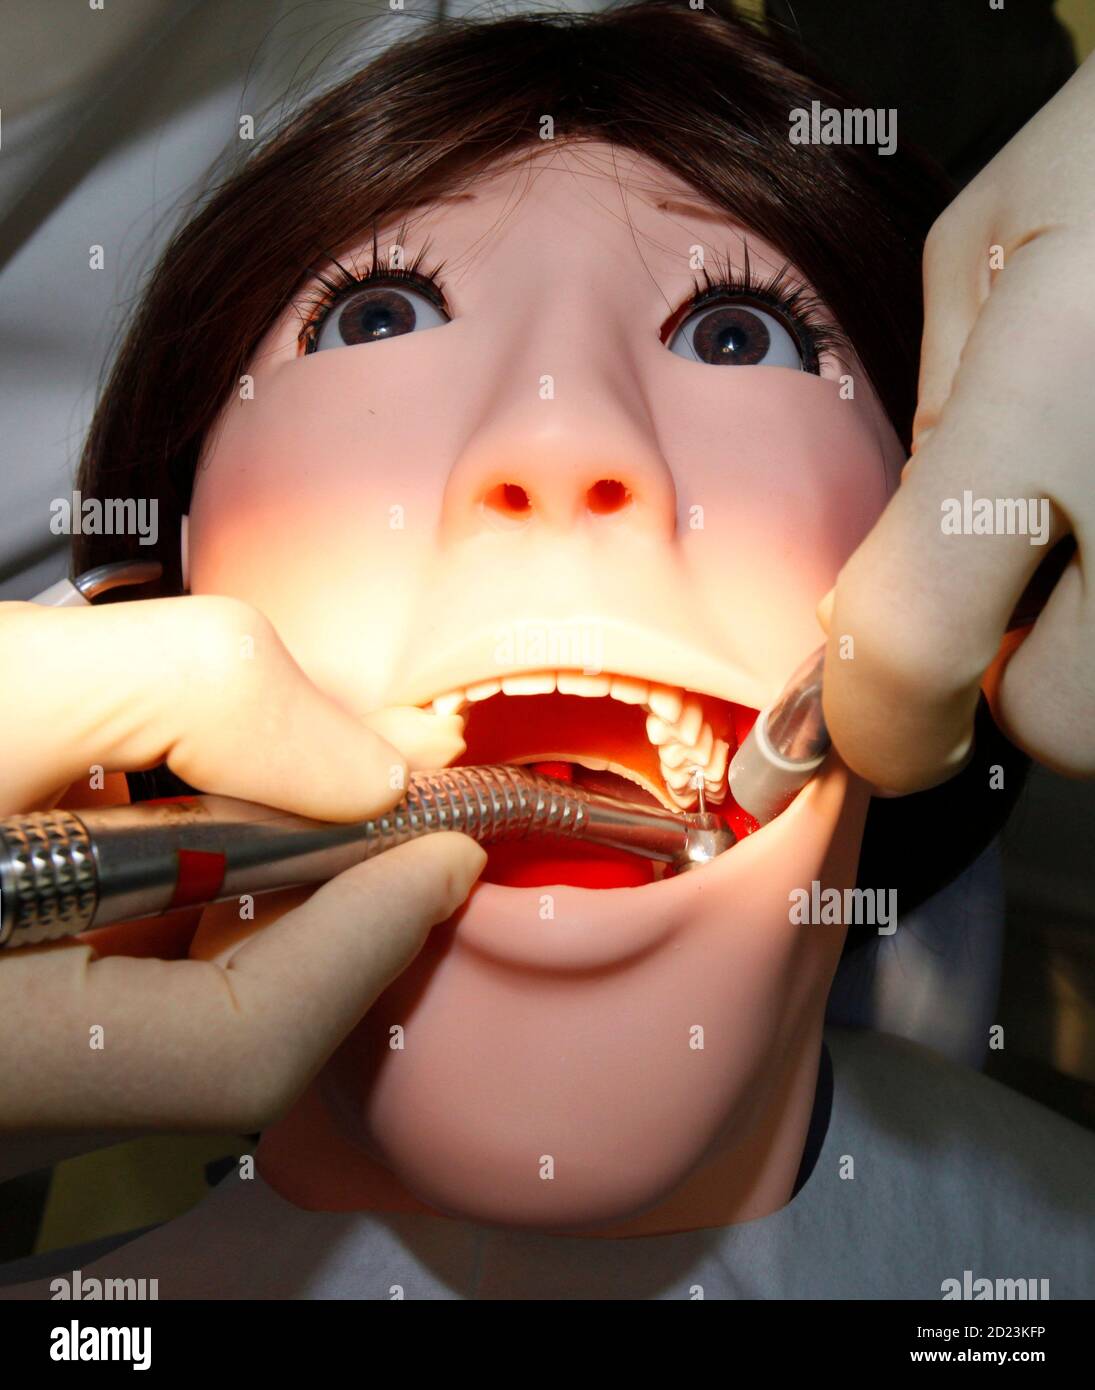 A dentist demonstrates on dental patient robot at its unveiling ceremony at Showa University in Tokyo 25, The humanoid female robot was developed to give practical experience for dental